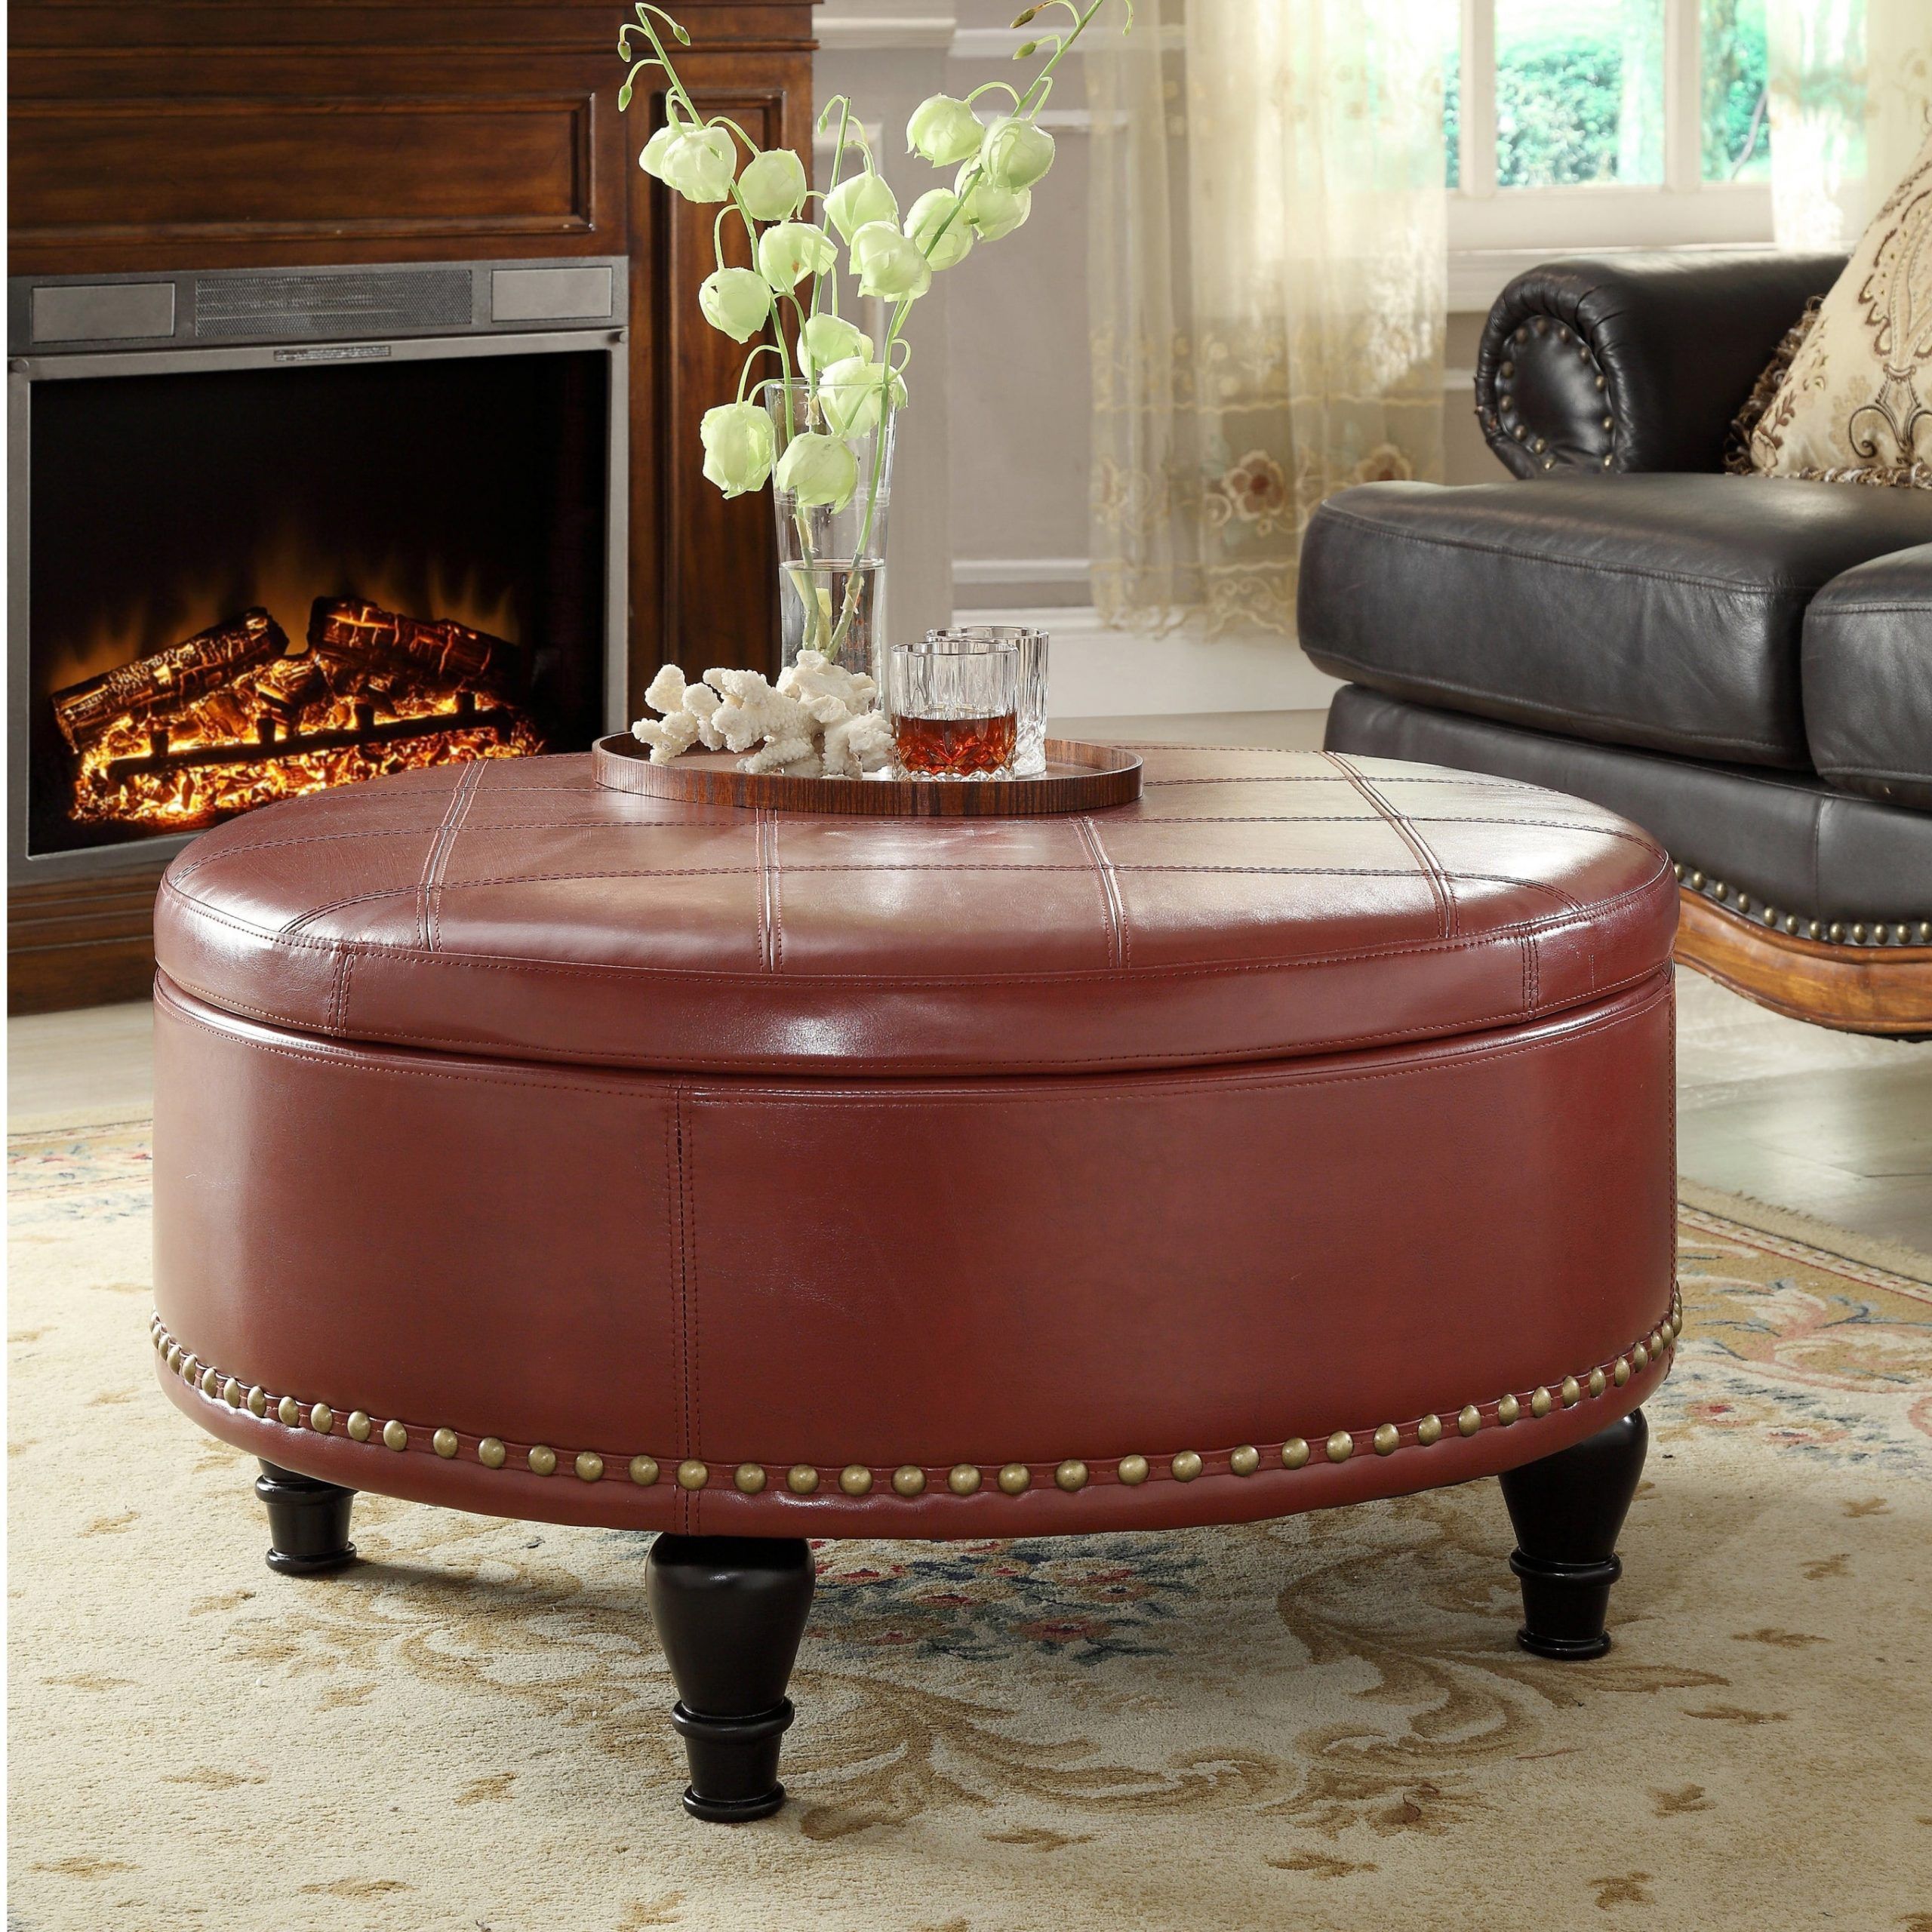 Most Popular Copper Grove Payara Round Storage Ottoman With Flip Top N/a (View 8 of 10)